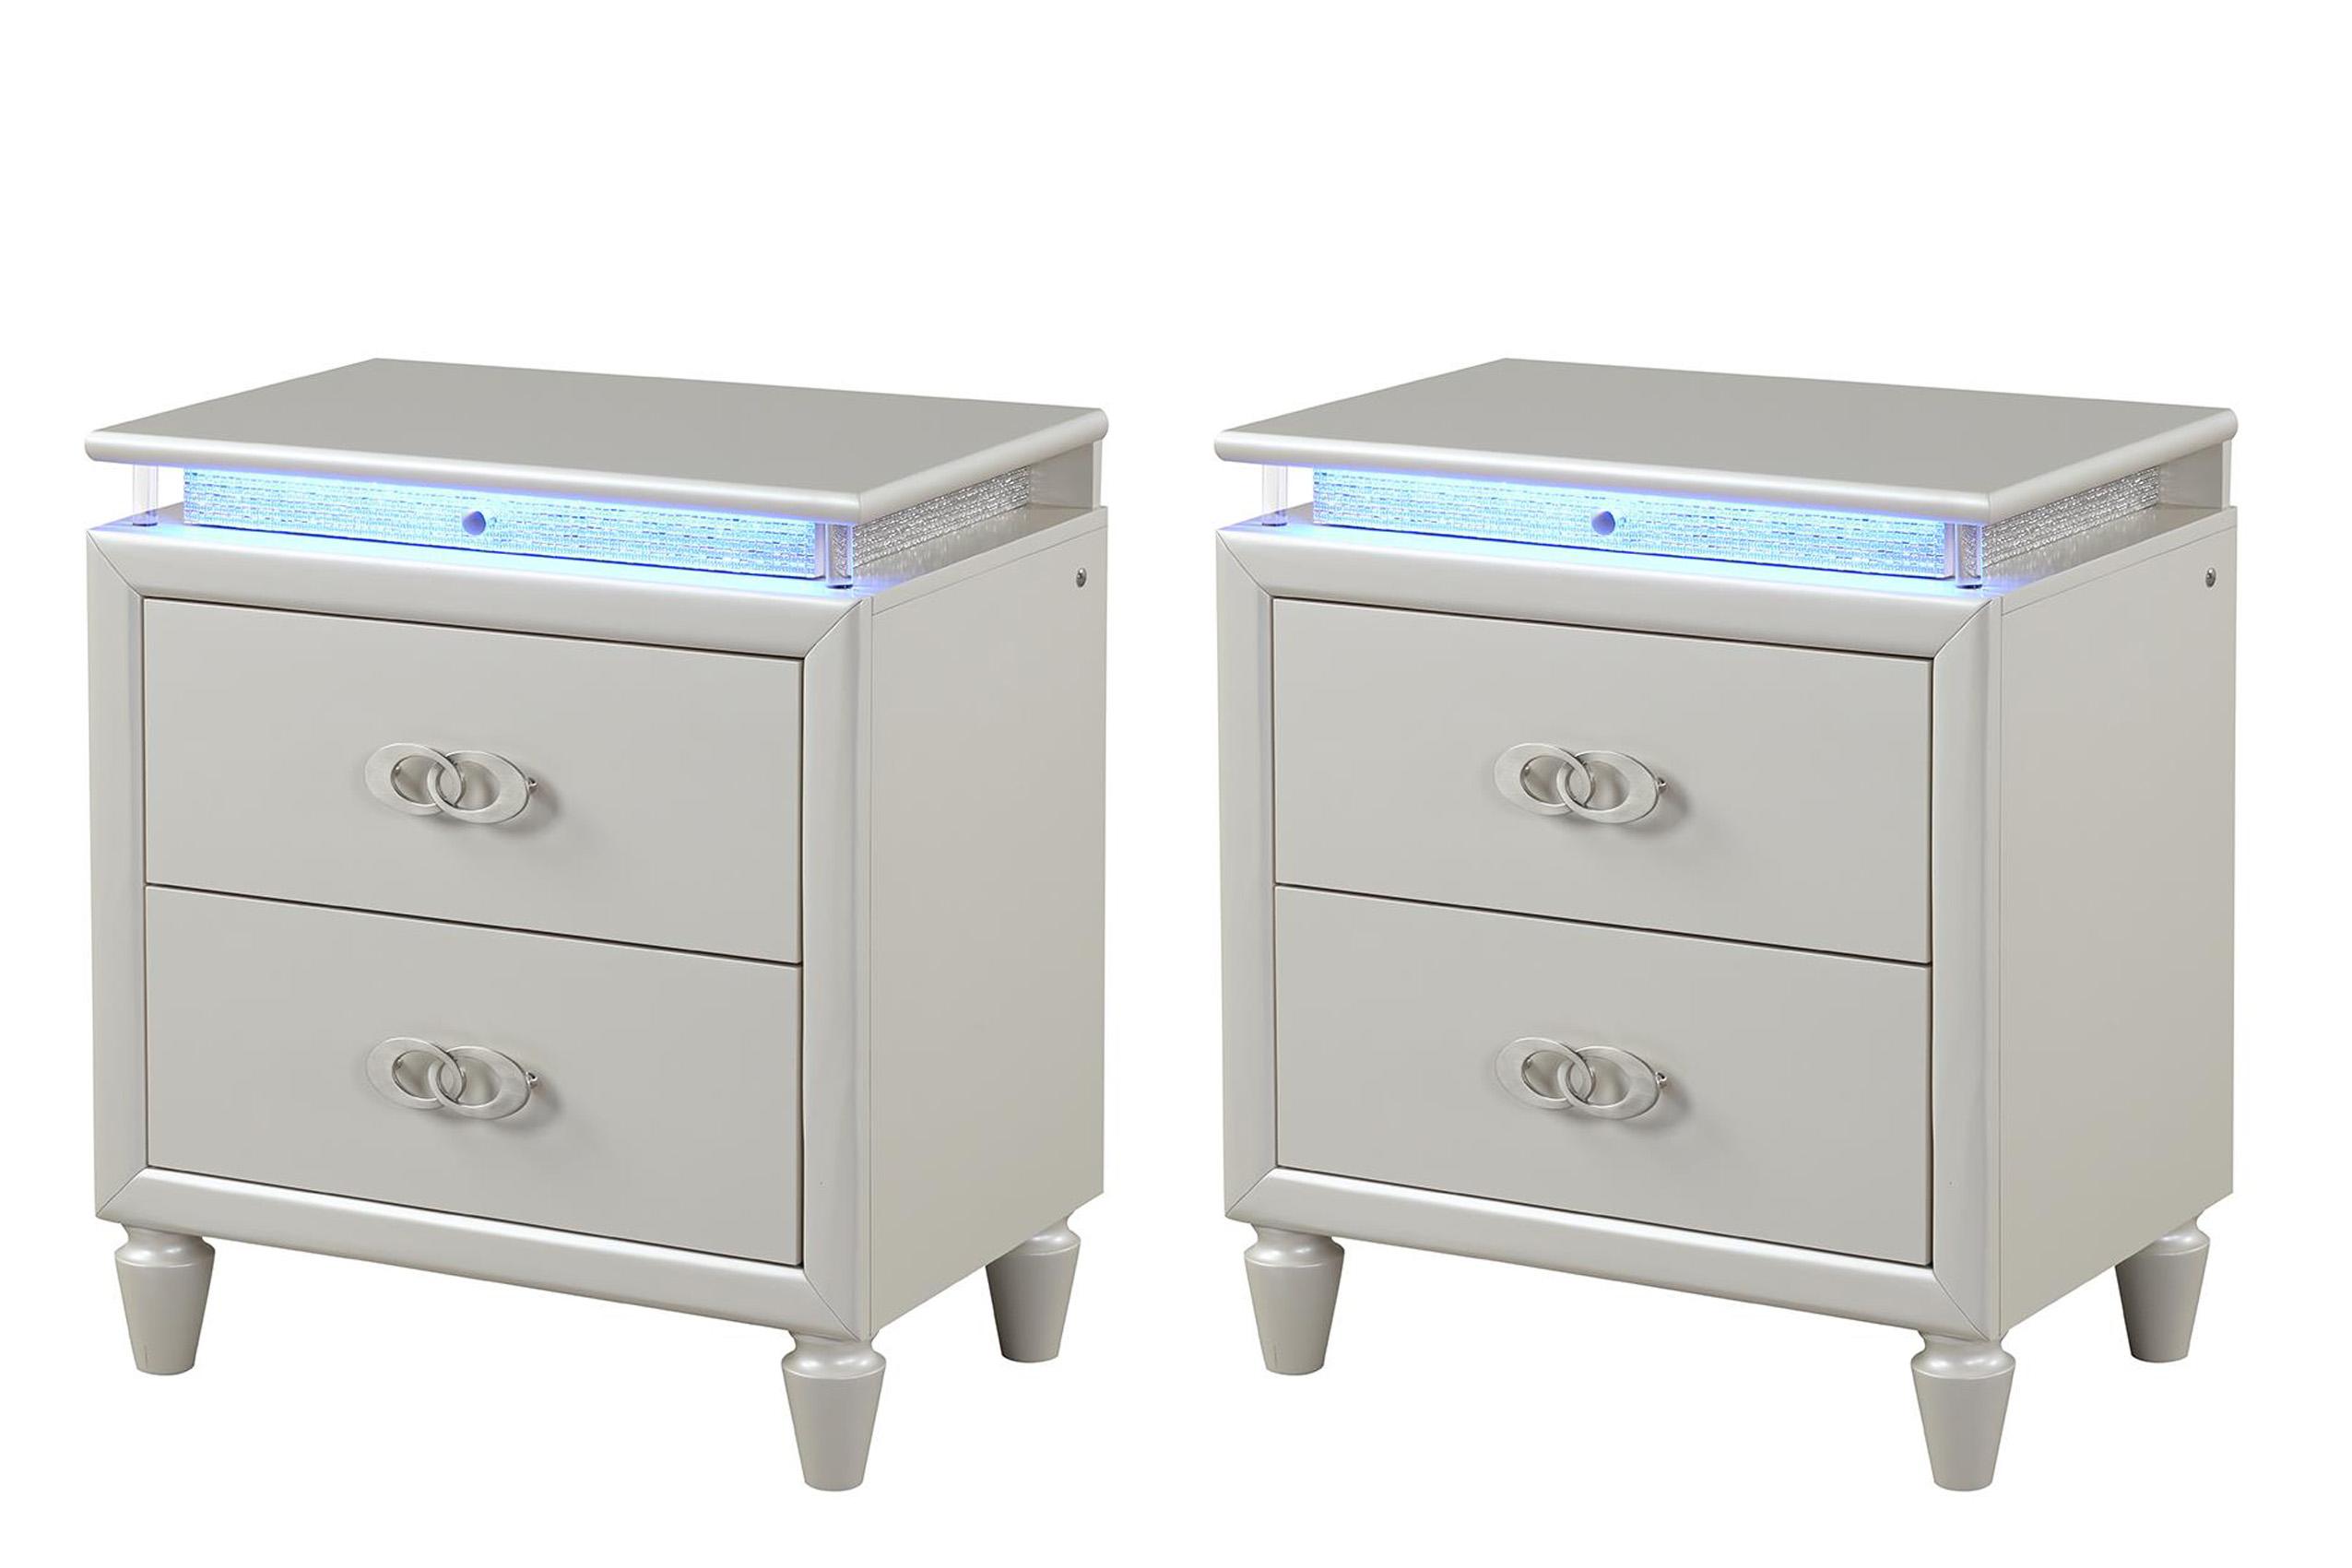 

    
Milky White Led 3 Drawer Nightstand Set 2 Pcs PASSION Galaxy Home Contemporary
